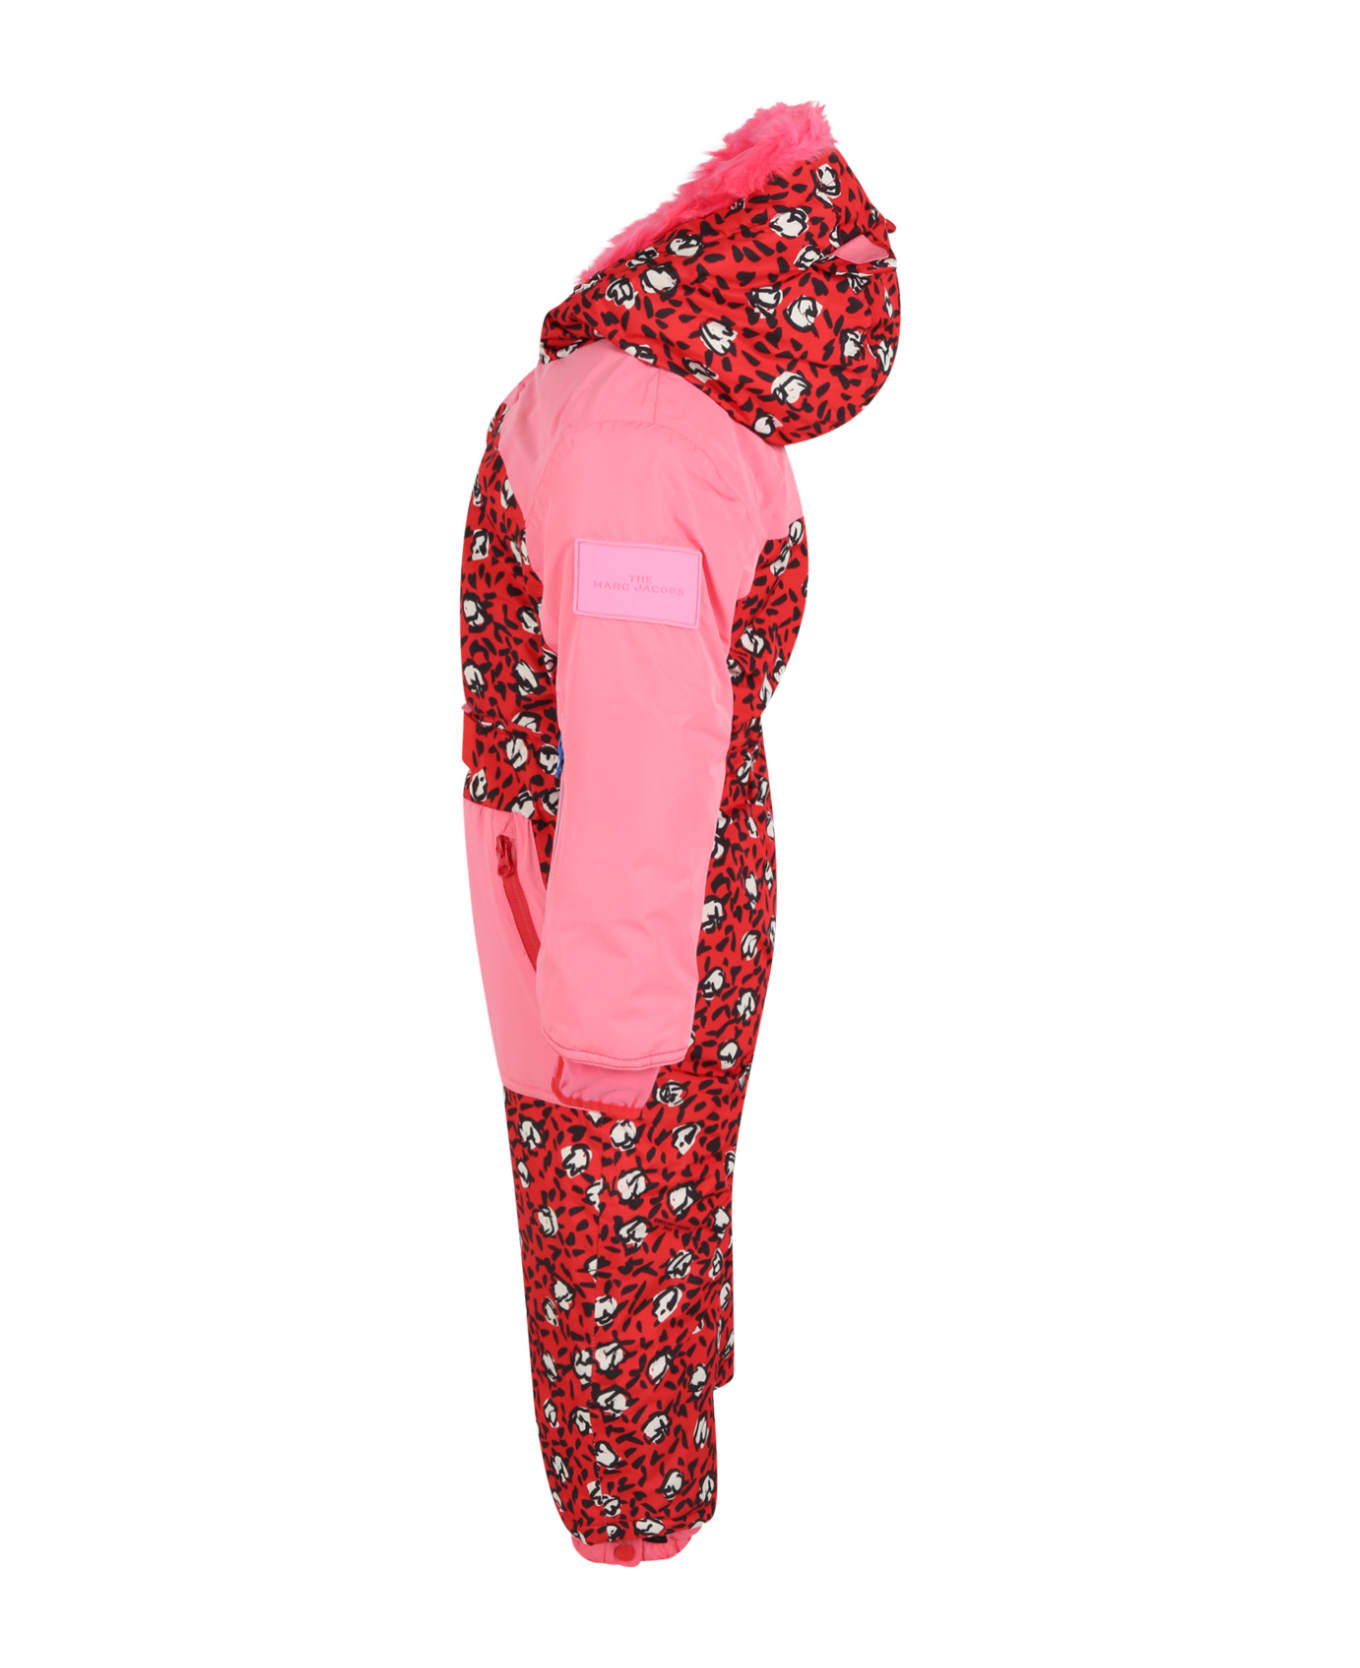 Marc Jacobs Red Snow Suit For Girl - Red ジャンプスーツ